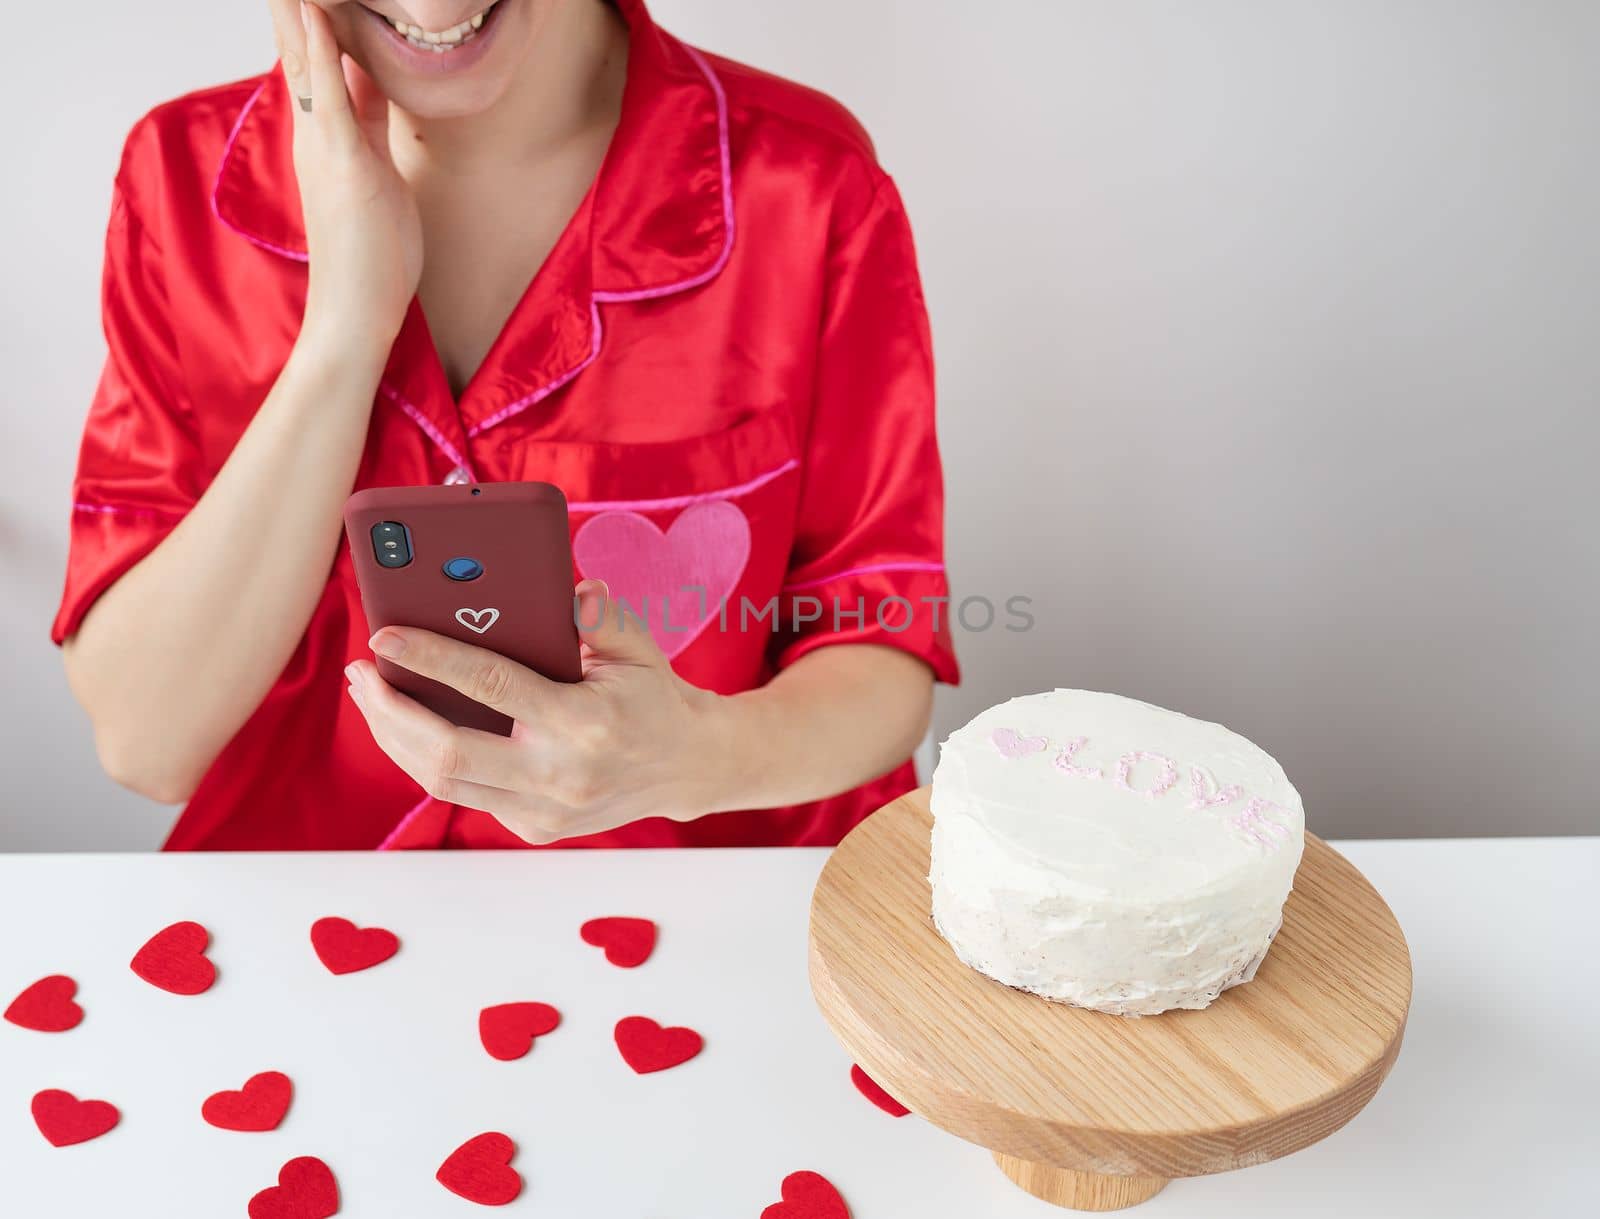 A happy girl in red clothes holds a smartphone in a cherry case with a heart and is happy with an SMS message from a loved one, a cake and small red hearts are on the table. Valentine's day and romantic date concept